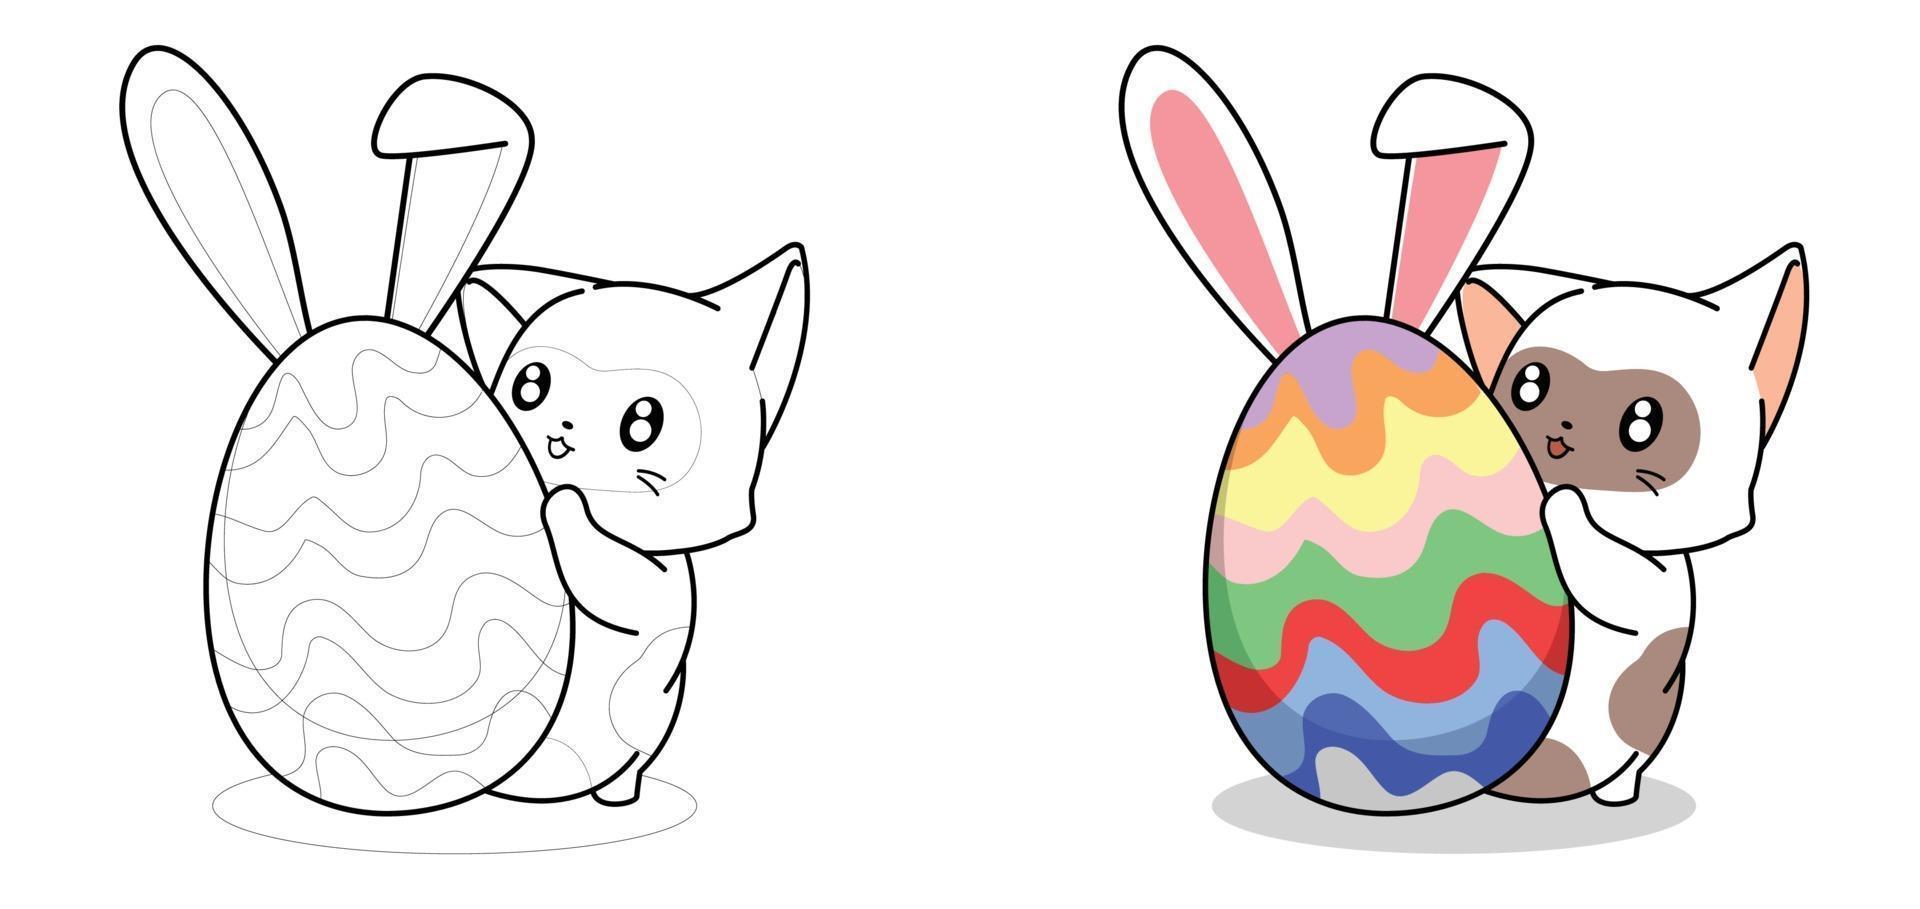 Adorable cat and bunny egg for easter day cartoon coloring page for kids vector